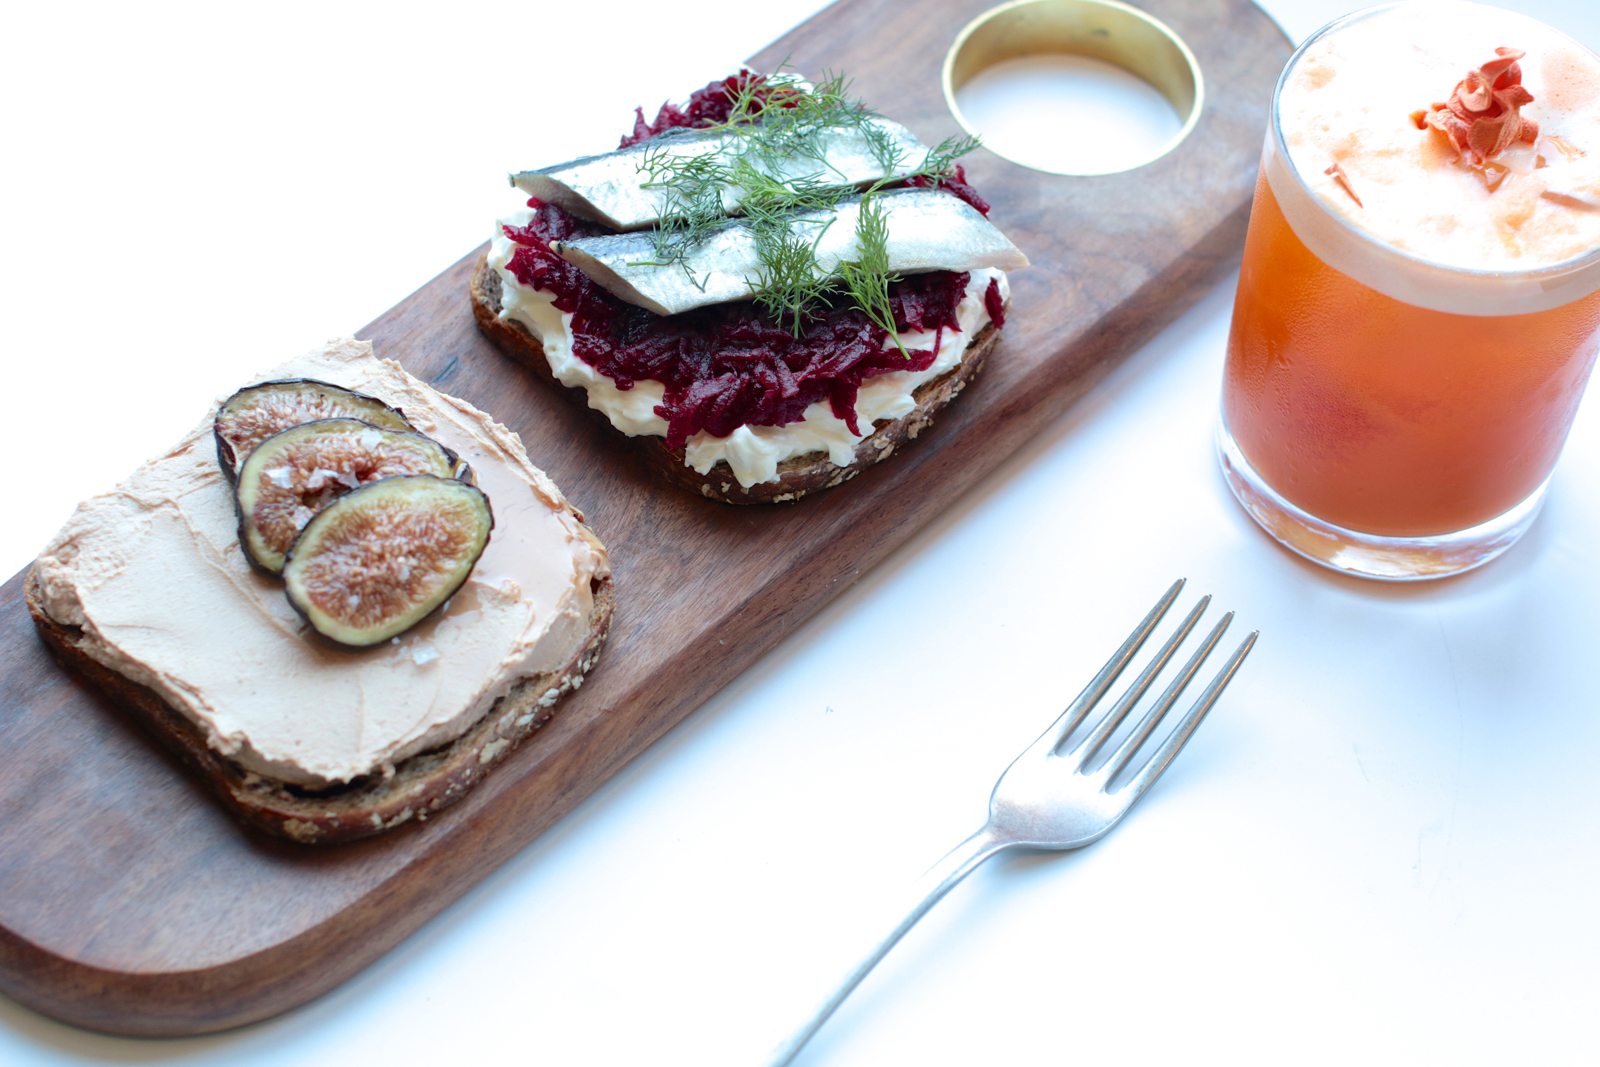 Danish smørrebrød are served on 90 per cent stone-milled rye bread. Pictured here are the brandy-infused duck liver pate with figs, honey and fleur de sel (left), and the house-pickled herring on beets and thick cream. $7 each.